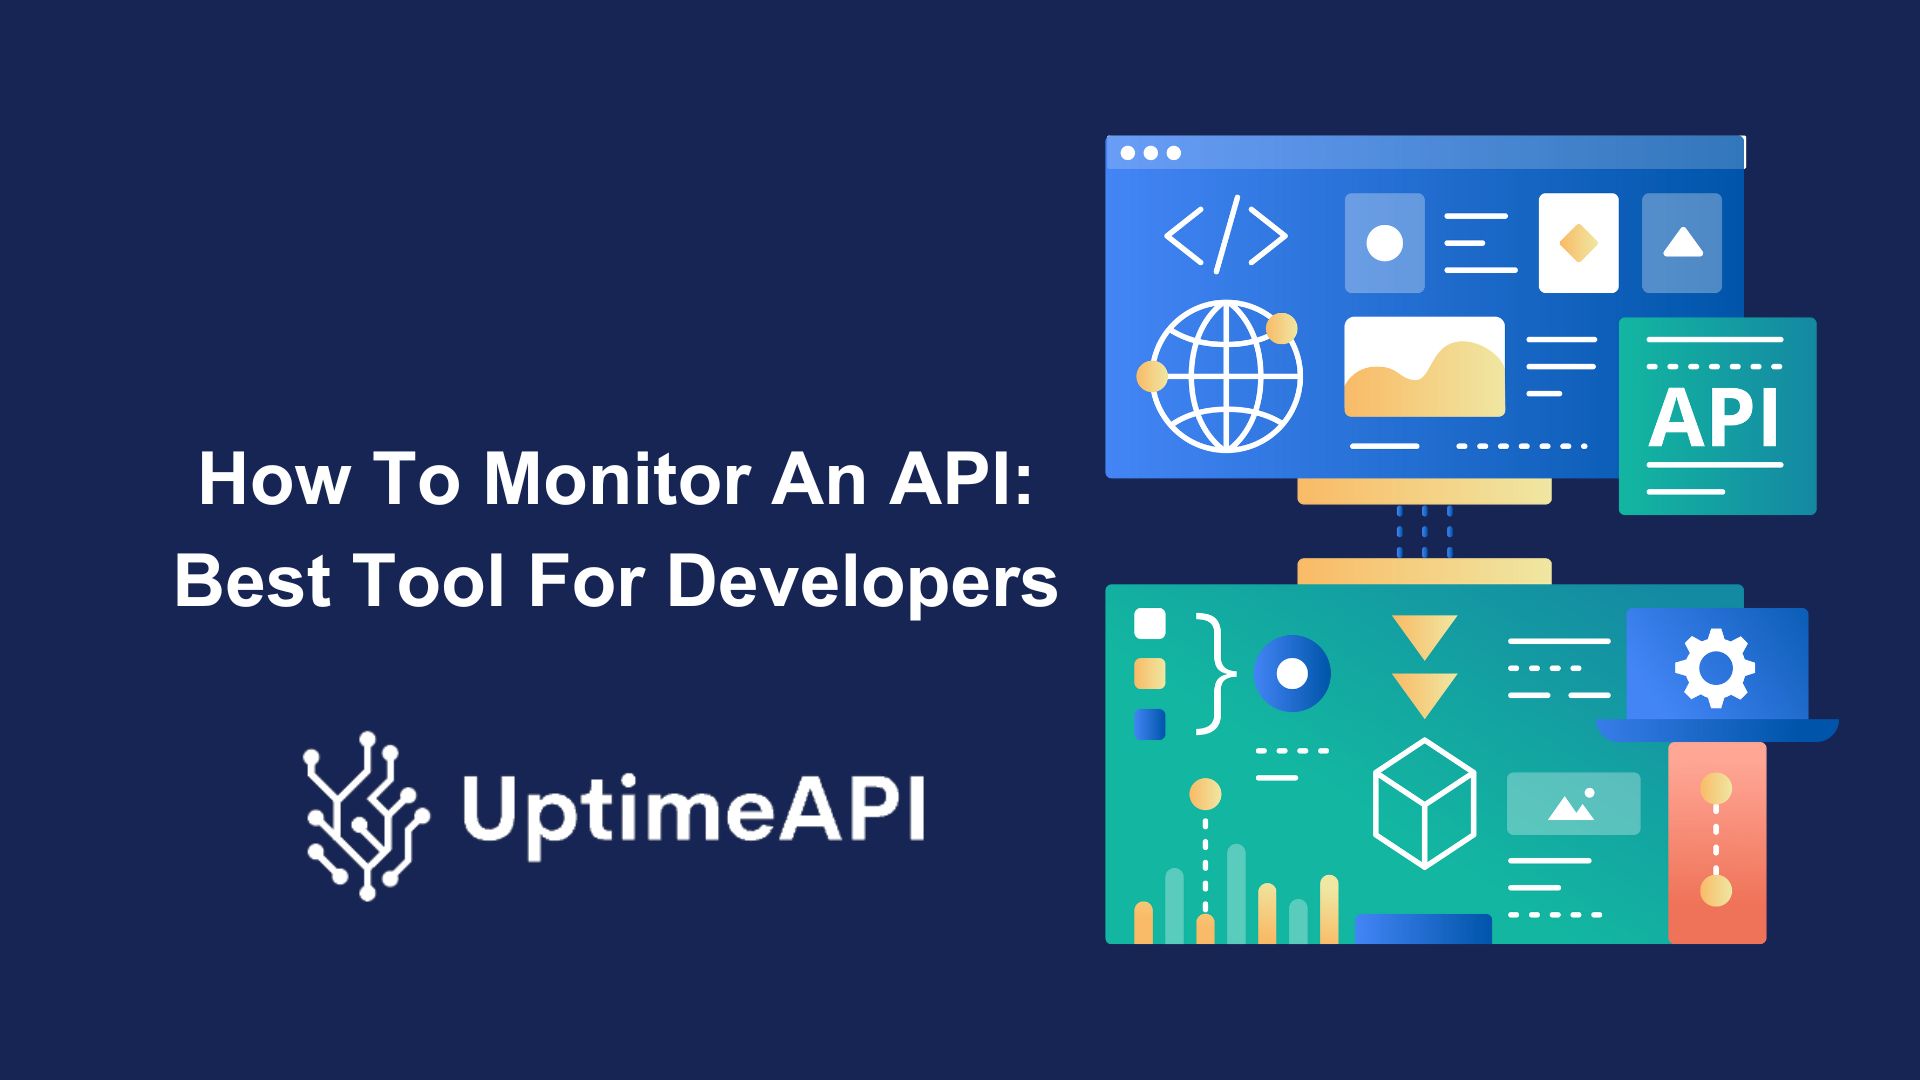 How To Monitor An API: Best Tool For Developers